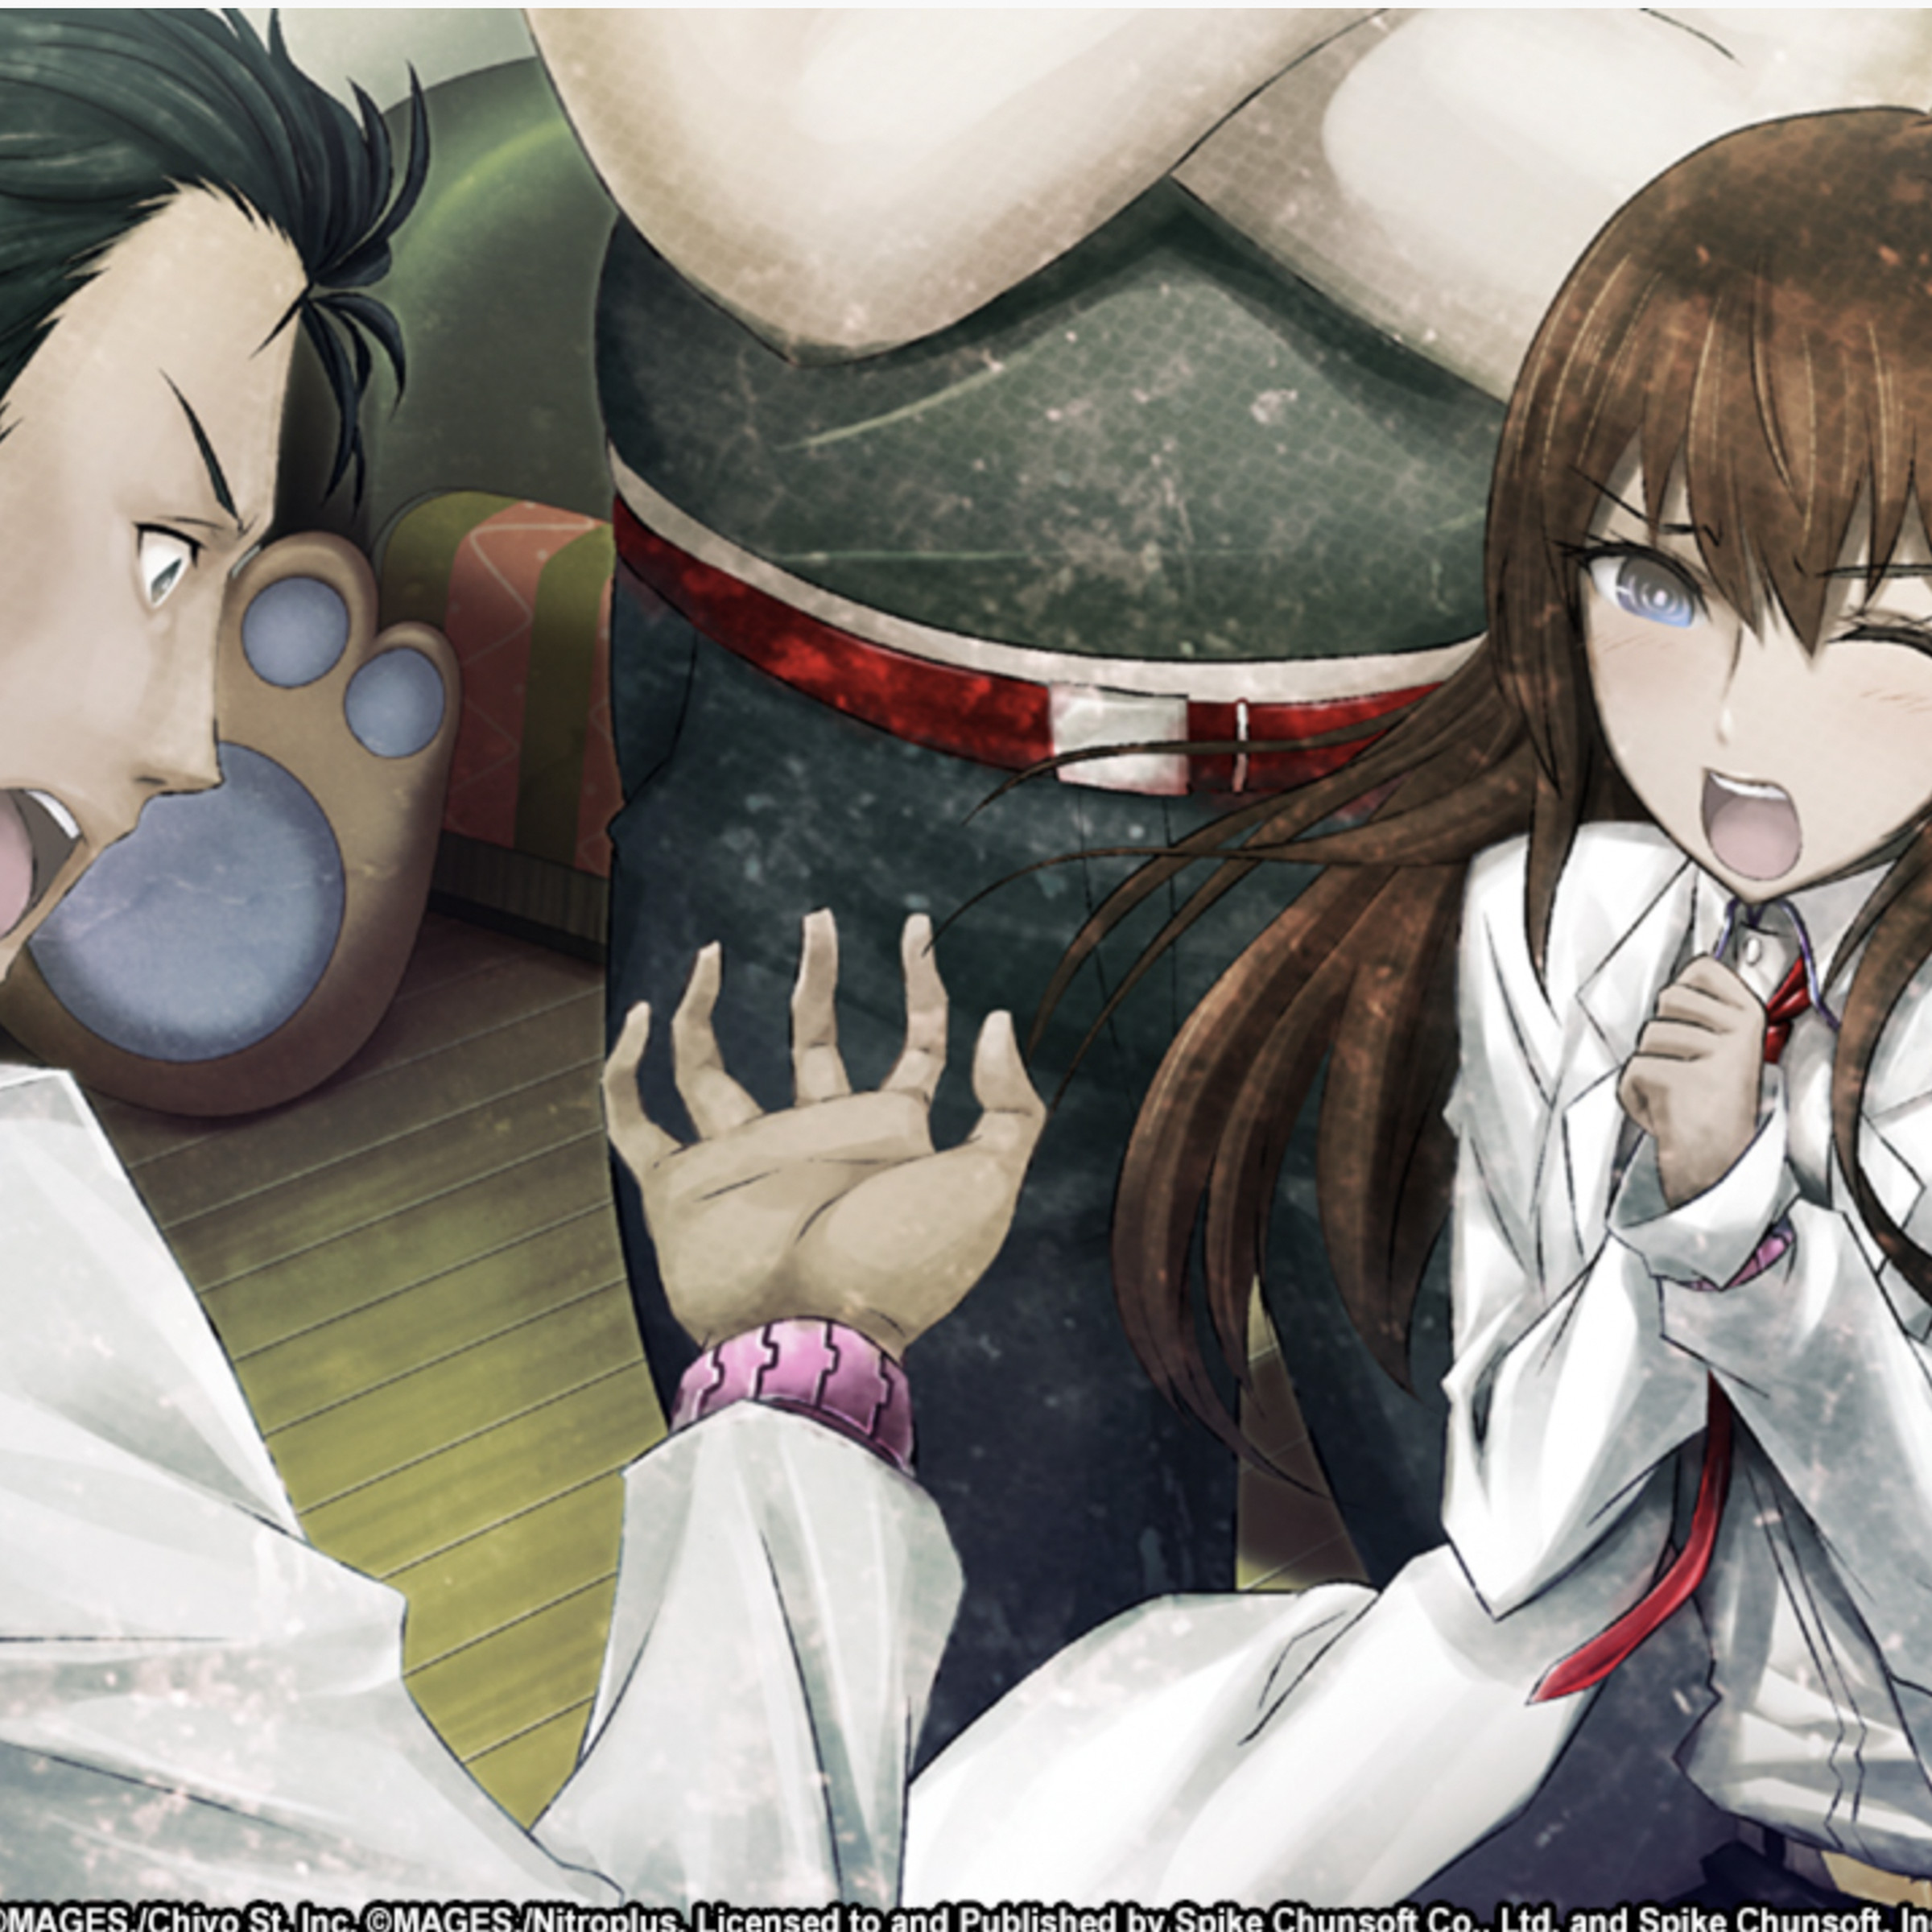 Screenshot from the visual novel Steins;Gate: My Darling’s Embrace featuring a young woman with long brown hair wincing as a man in a white shirt yells at a pink object wrapped around his wrist